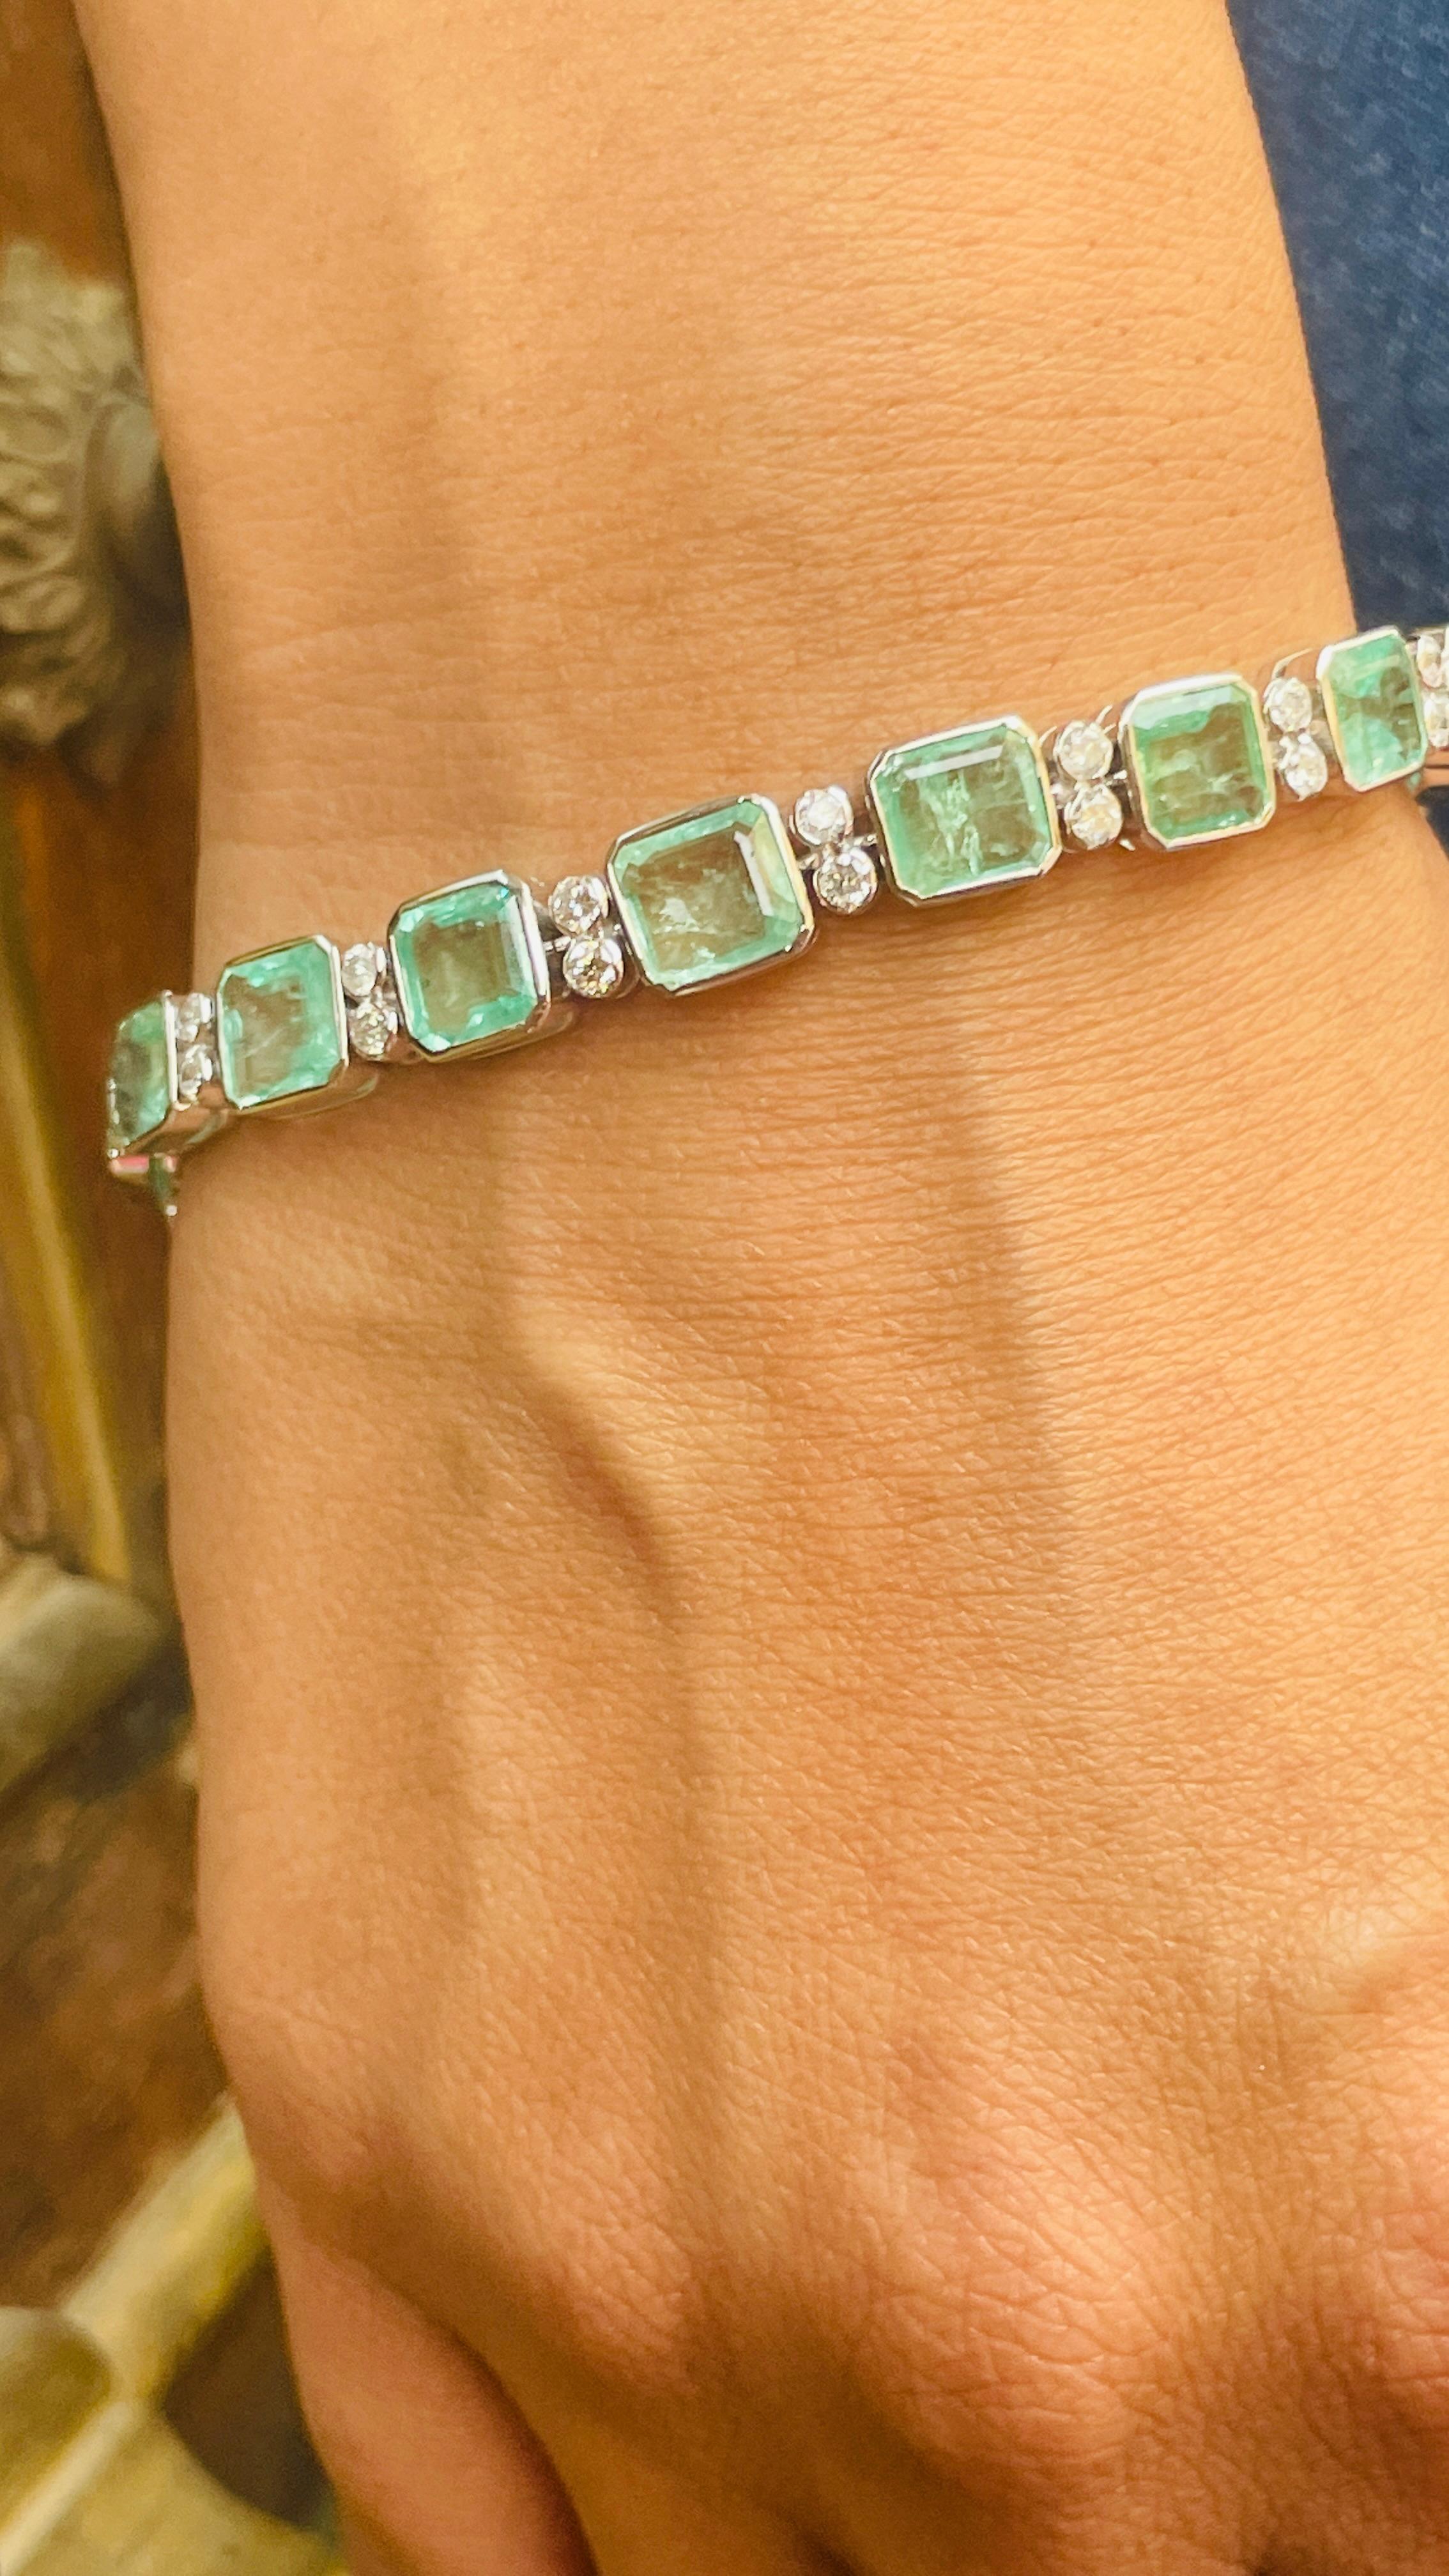 33.58 Carat Octagon Cut Emerald Tennis Bracelet with Diamonds in 18K White Gold For Sale 6